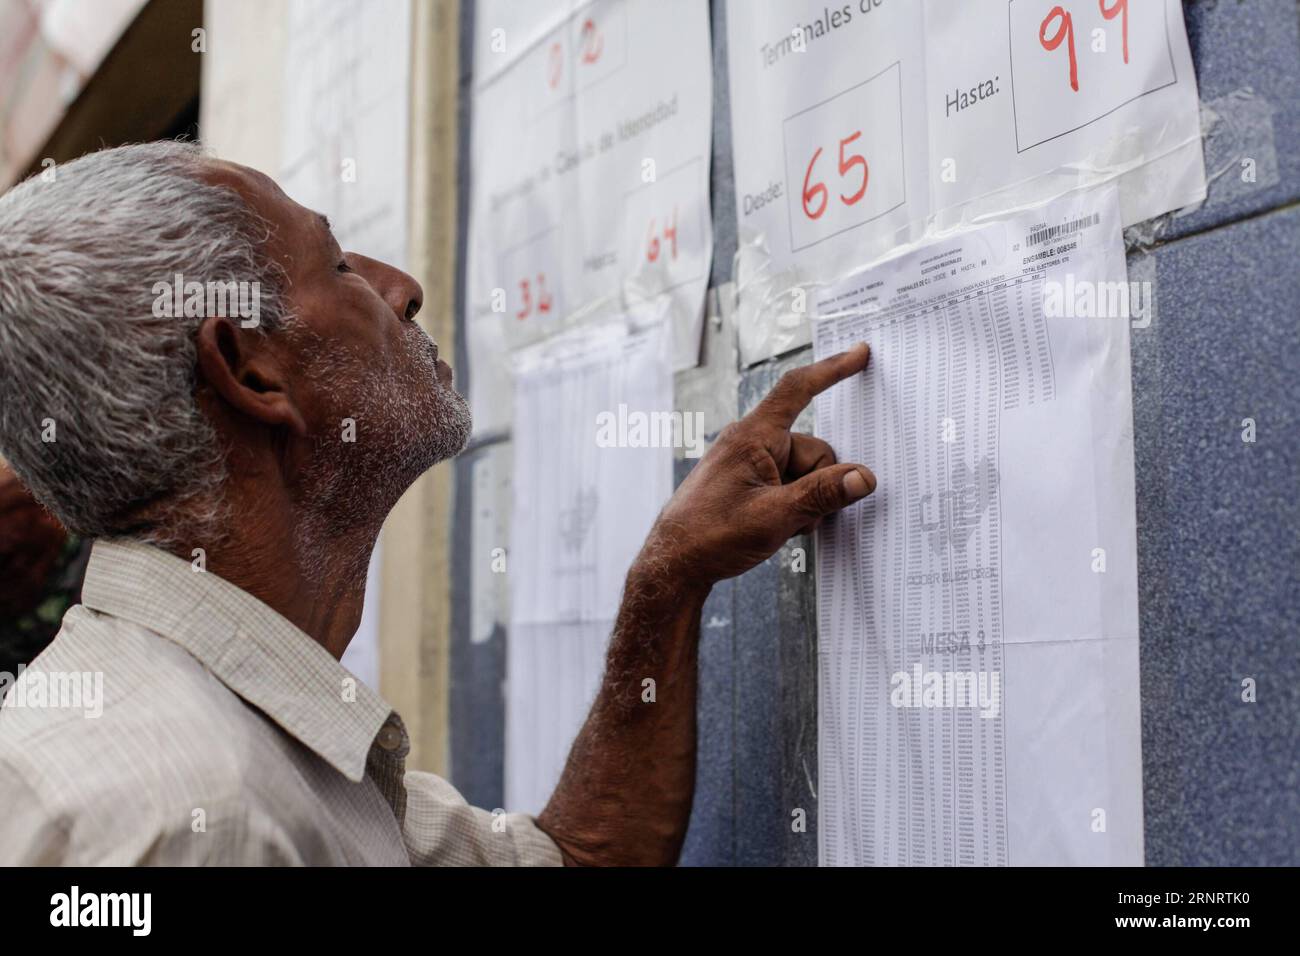 (171016) -- MIRANDA, Oct. 16, 2017 -- A man reviews listings at a polling station in Miranda state, Venezuela, on Oct. 15, 2017. On Sunday, over 18 million Venezuelans are eligible to vote for 197 candidates running for the country s 23 governor posts. ) (ma) (fnc)(yk) VENEZUELA-MIRANDA-POLITICS-ELECTIONS BorisxVergara PUBLICATIONxNOTxINxCHN Stock Photo